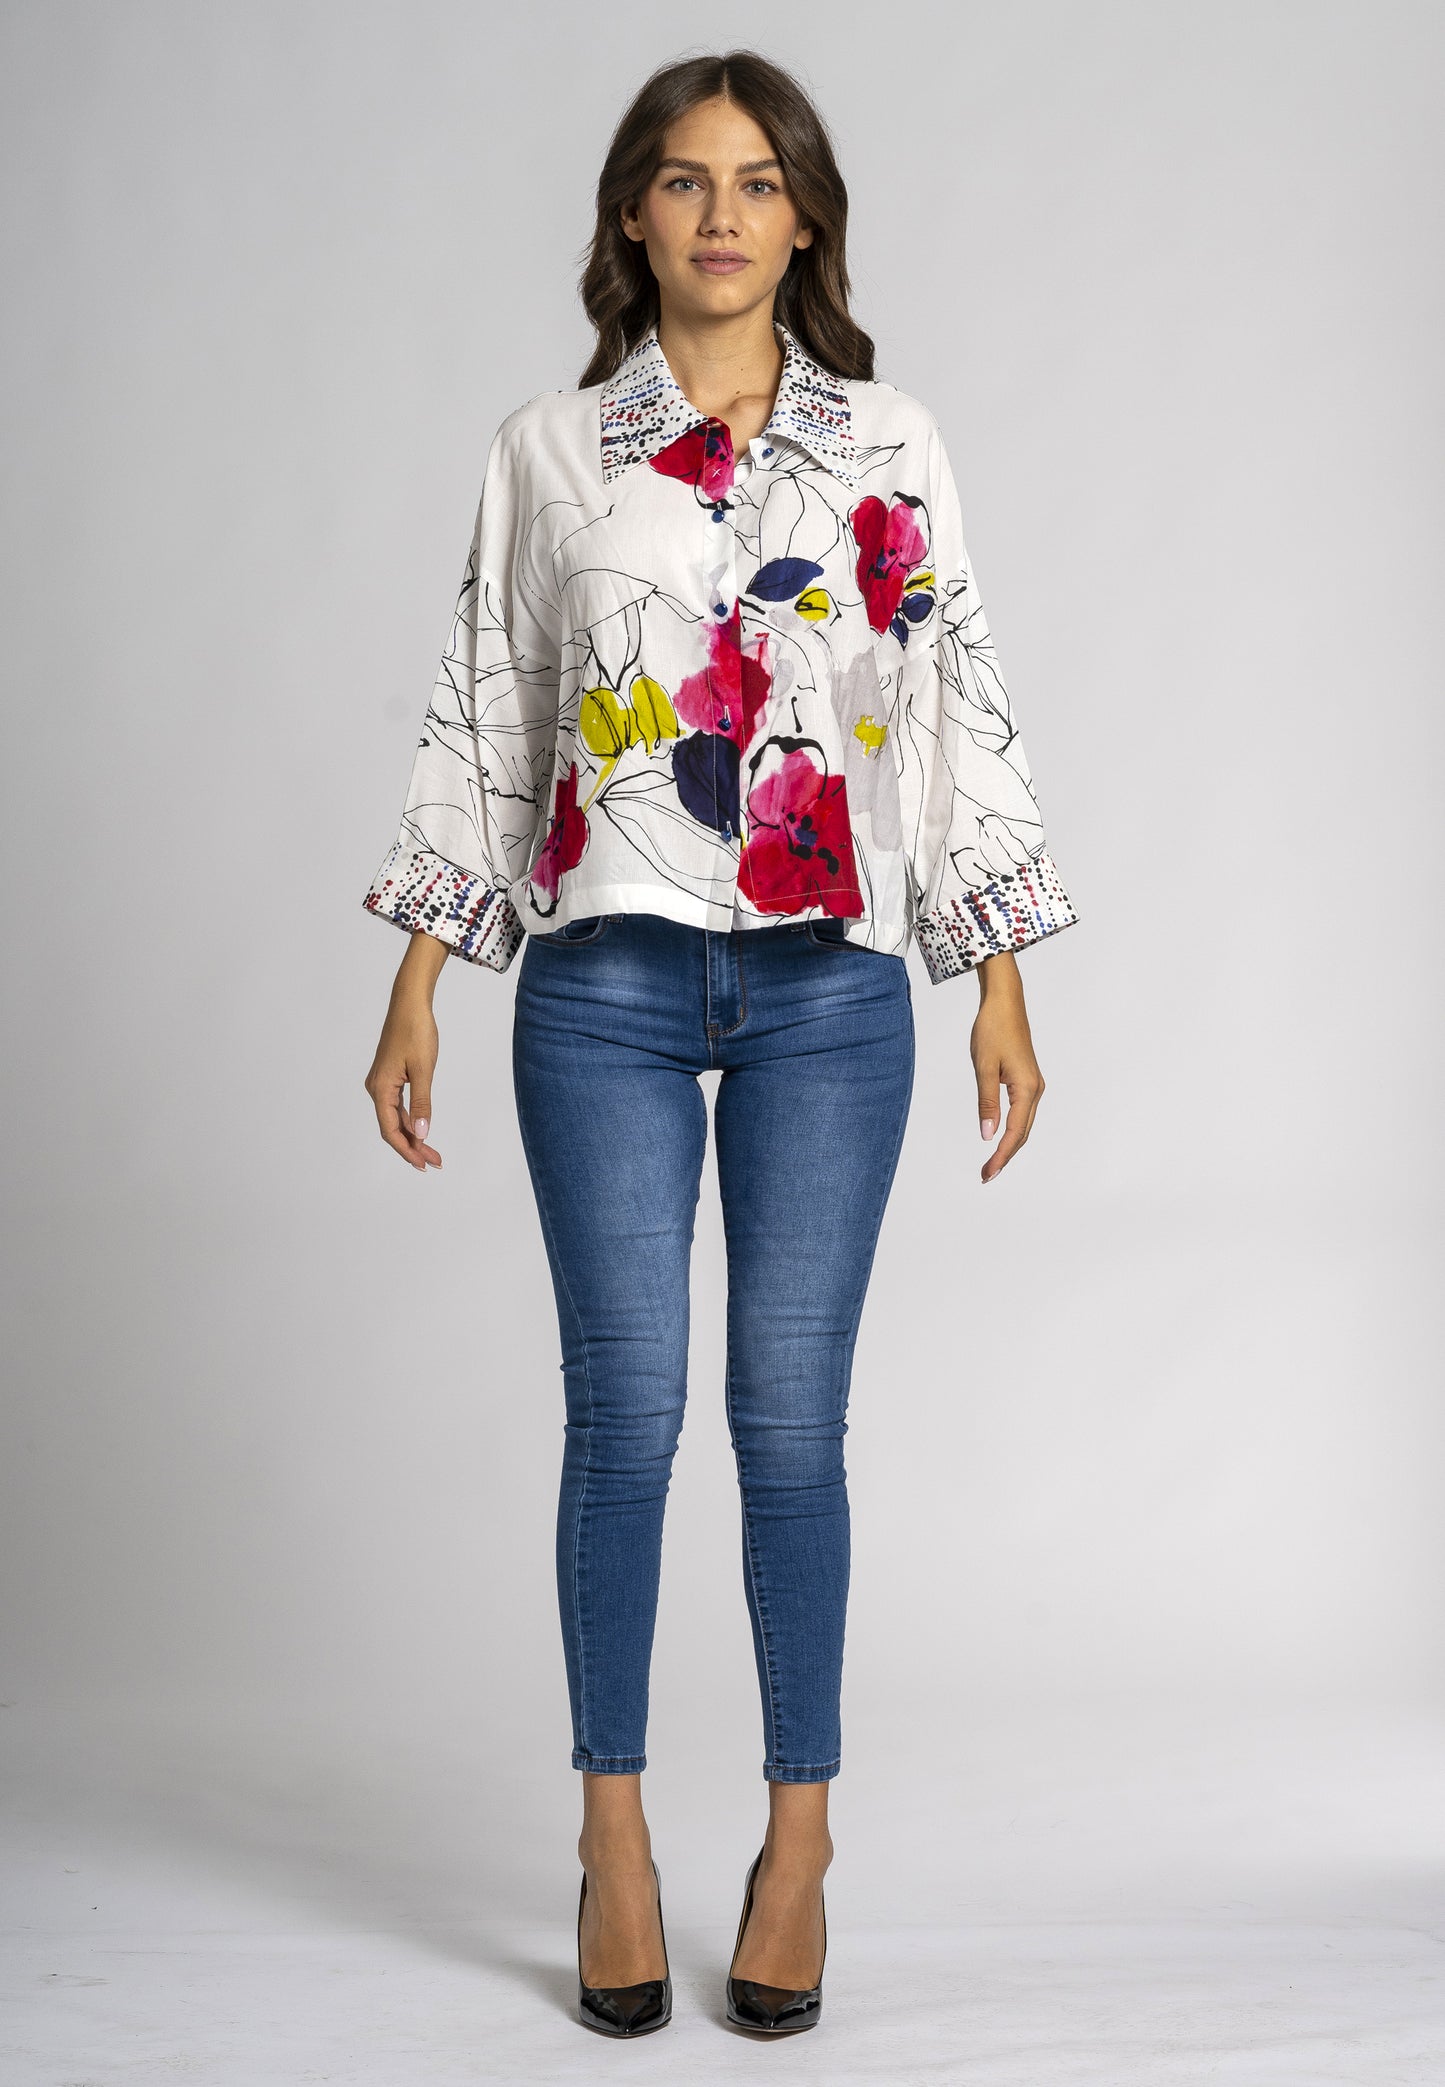 Glicine Floral Print Shirt - Viscose and Linen, Oversized, Elbow Sleeves, Classic Collar, Witty Combination of Prints